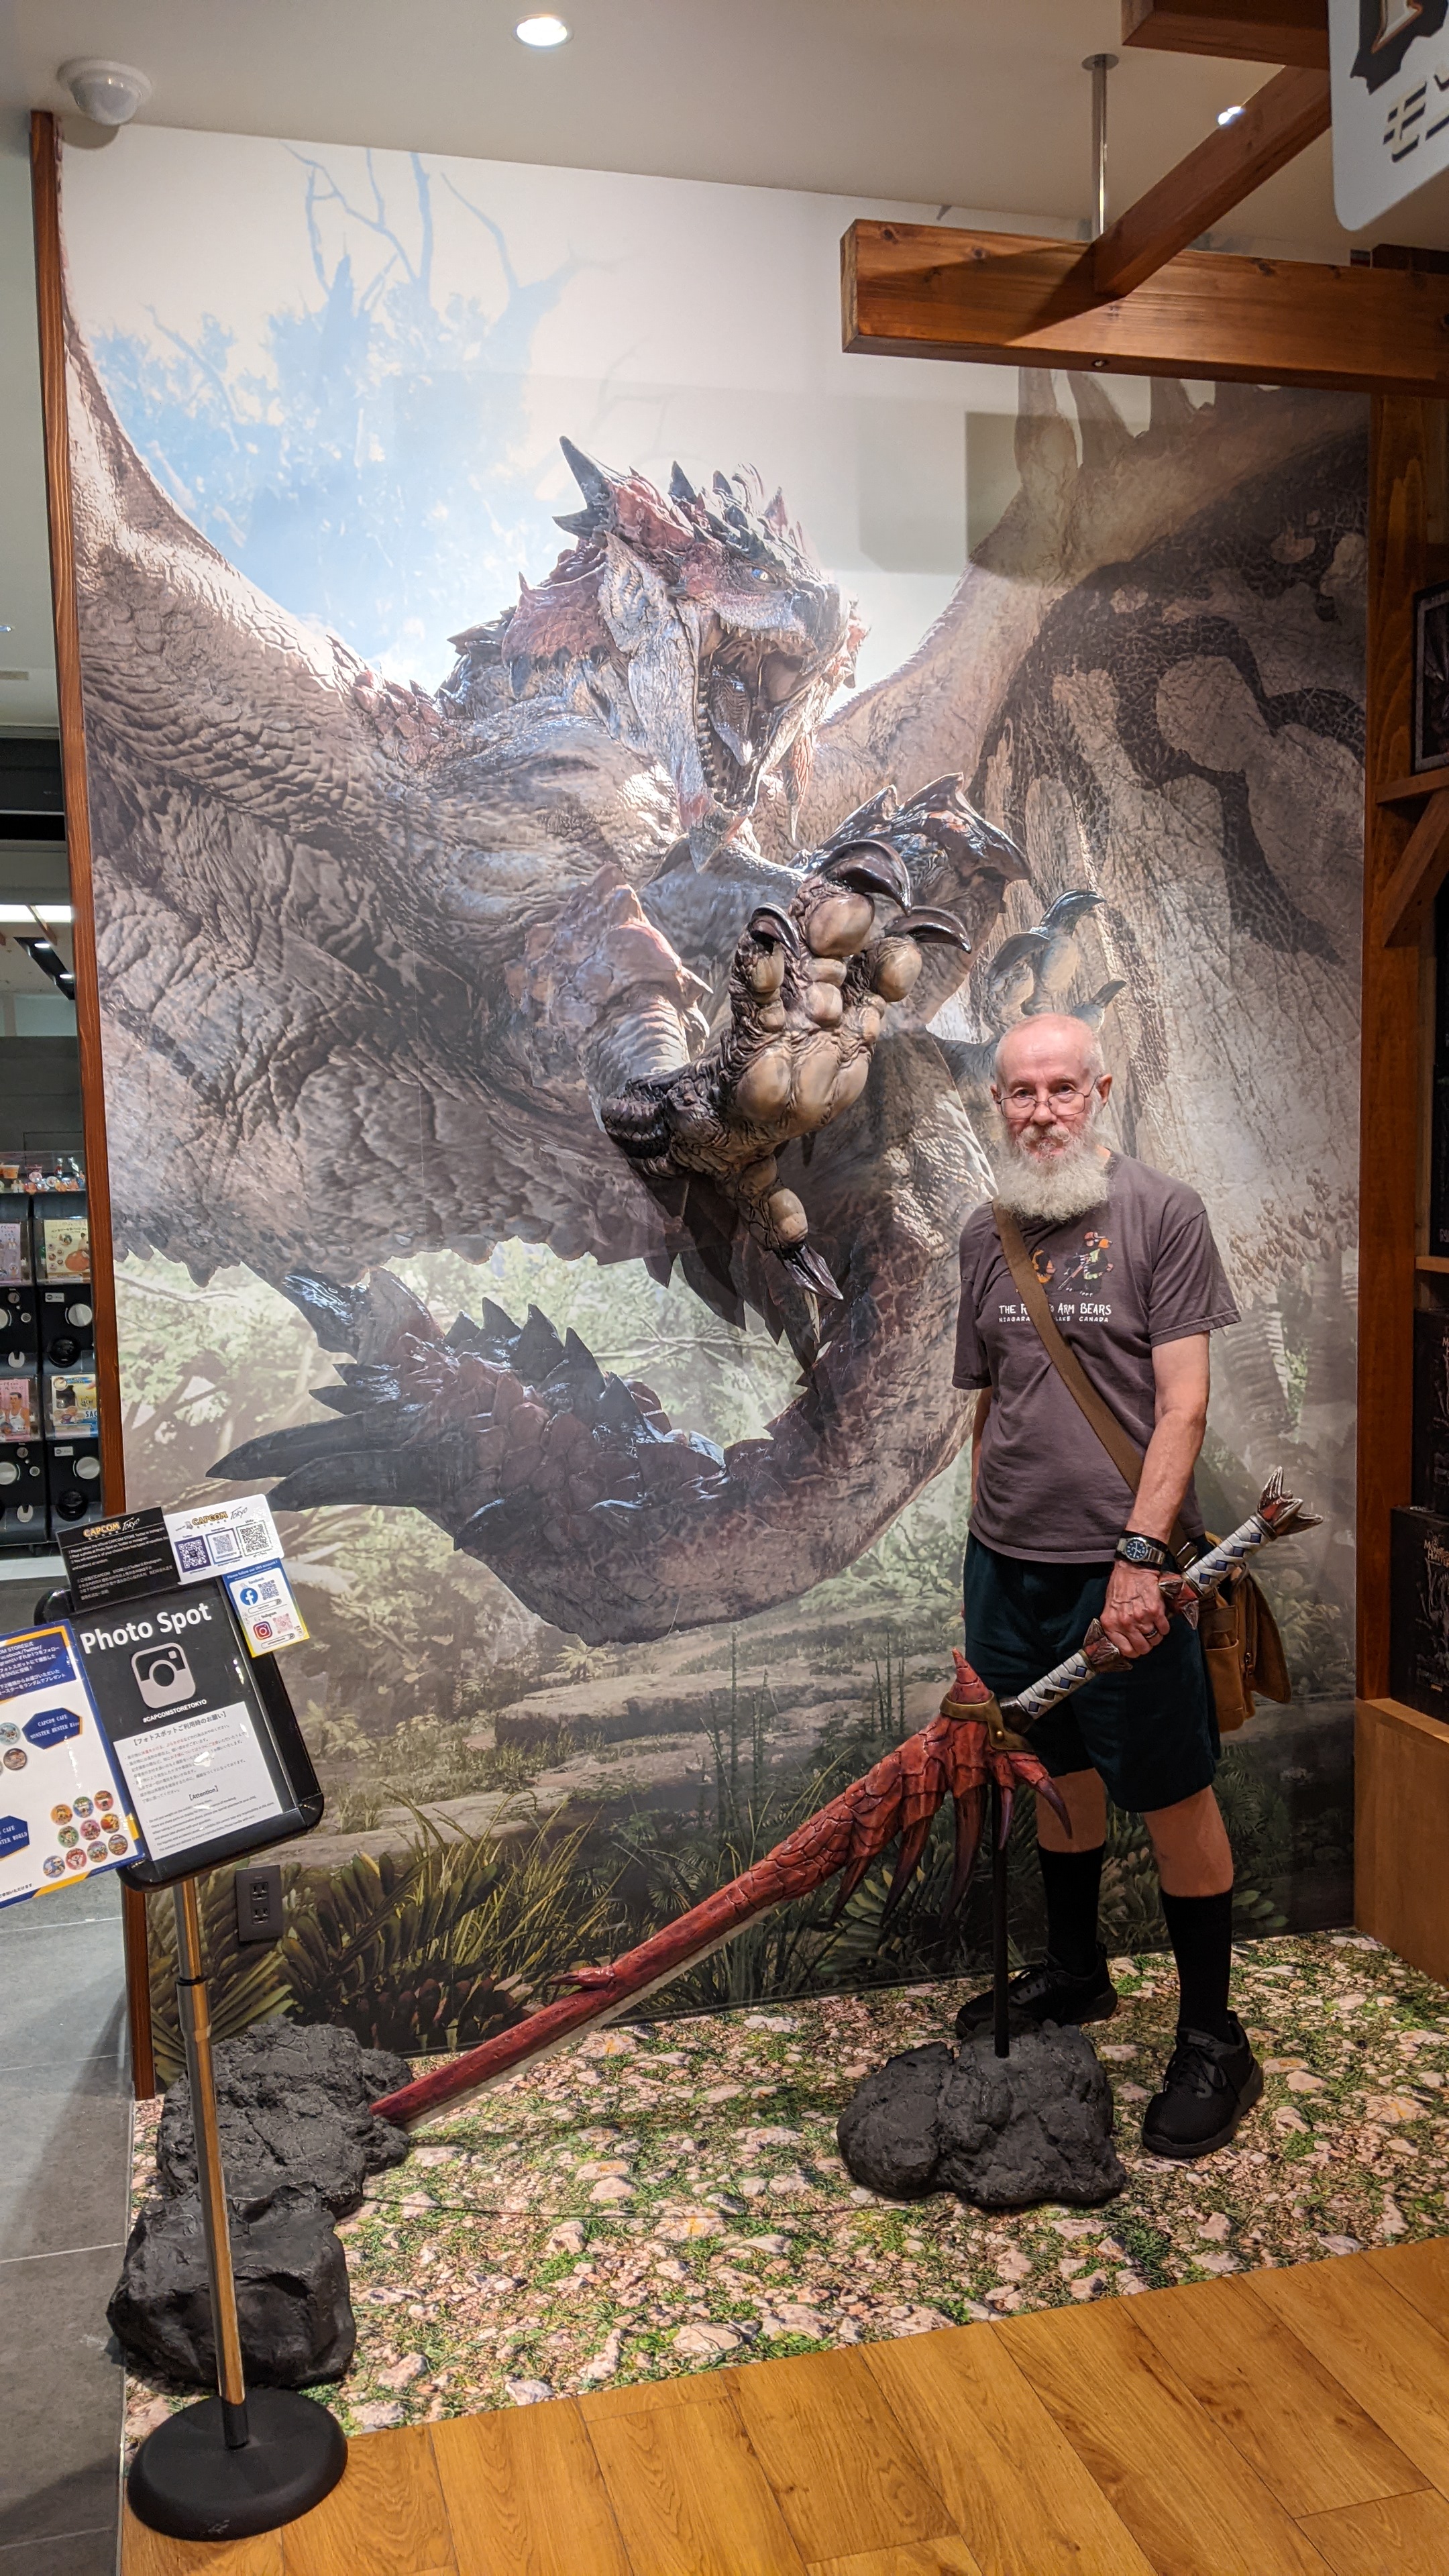 Chris holding a large fake sword in front of a dragon poster looking calm